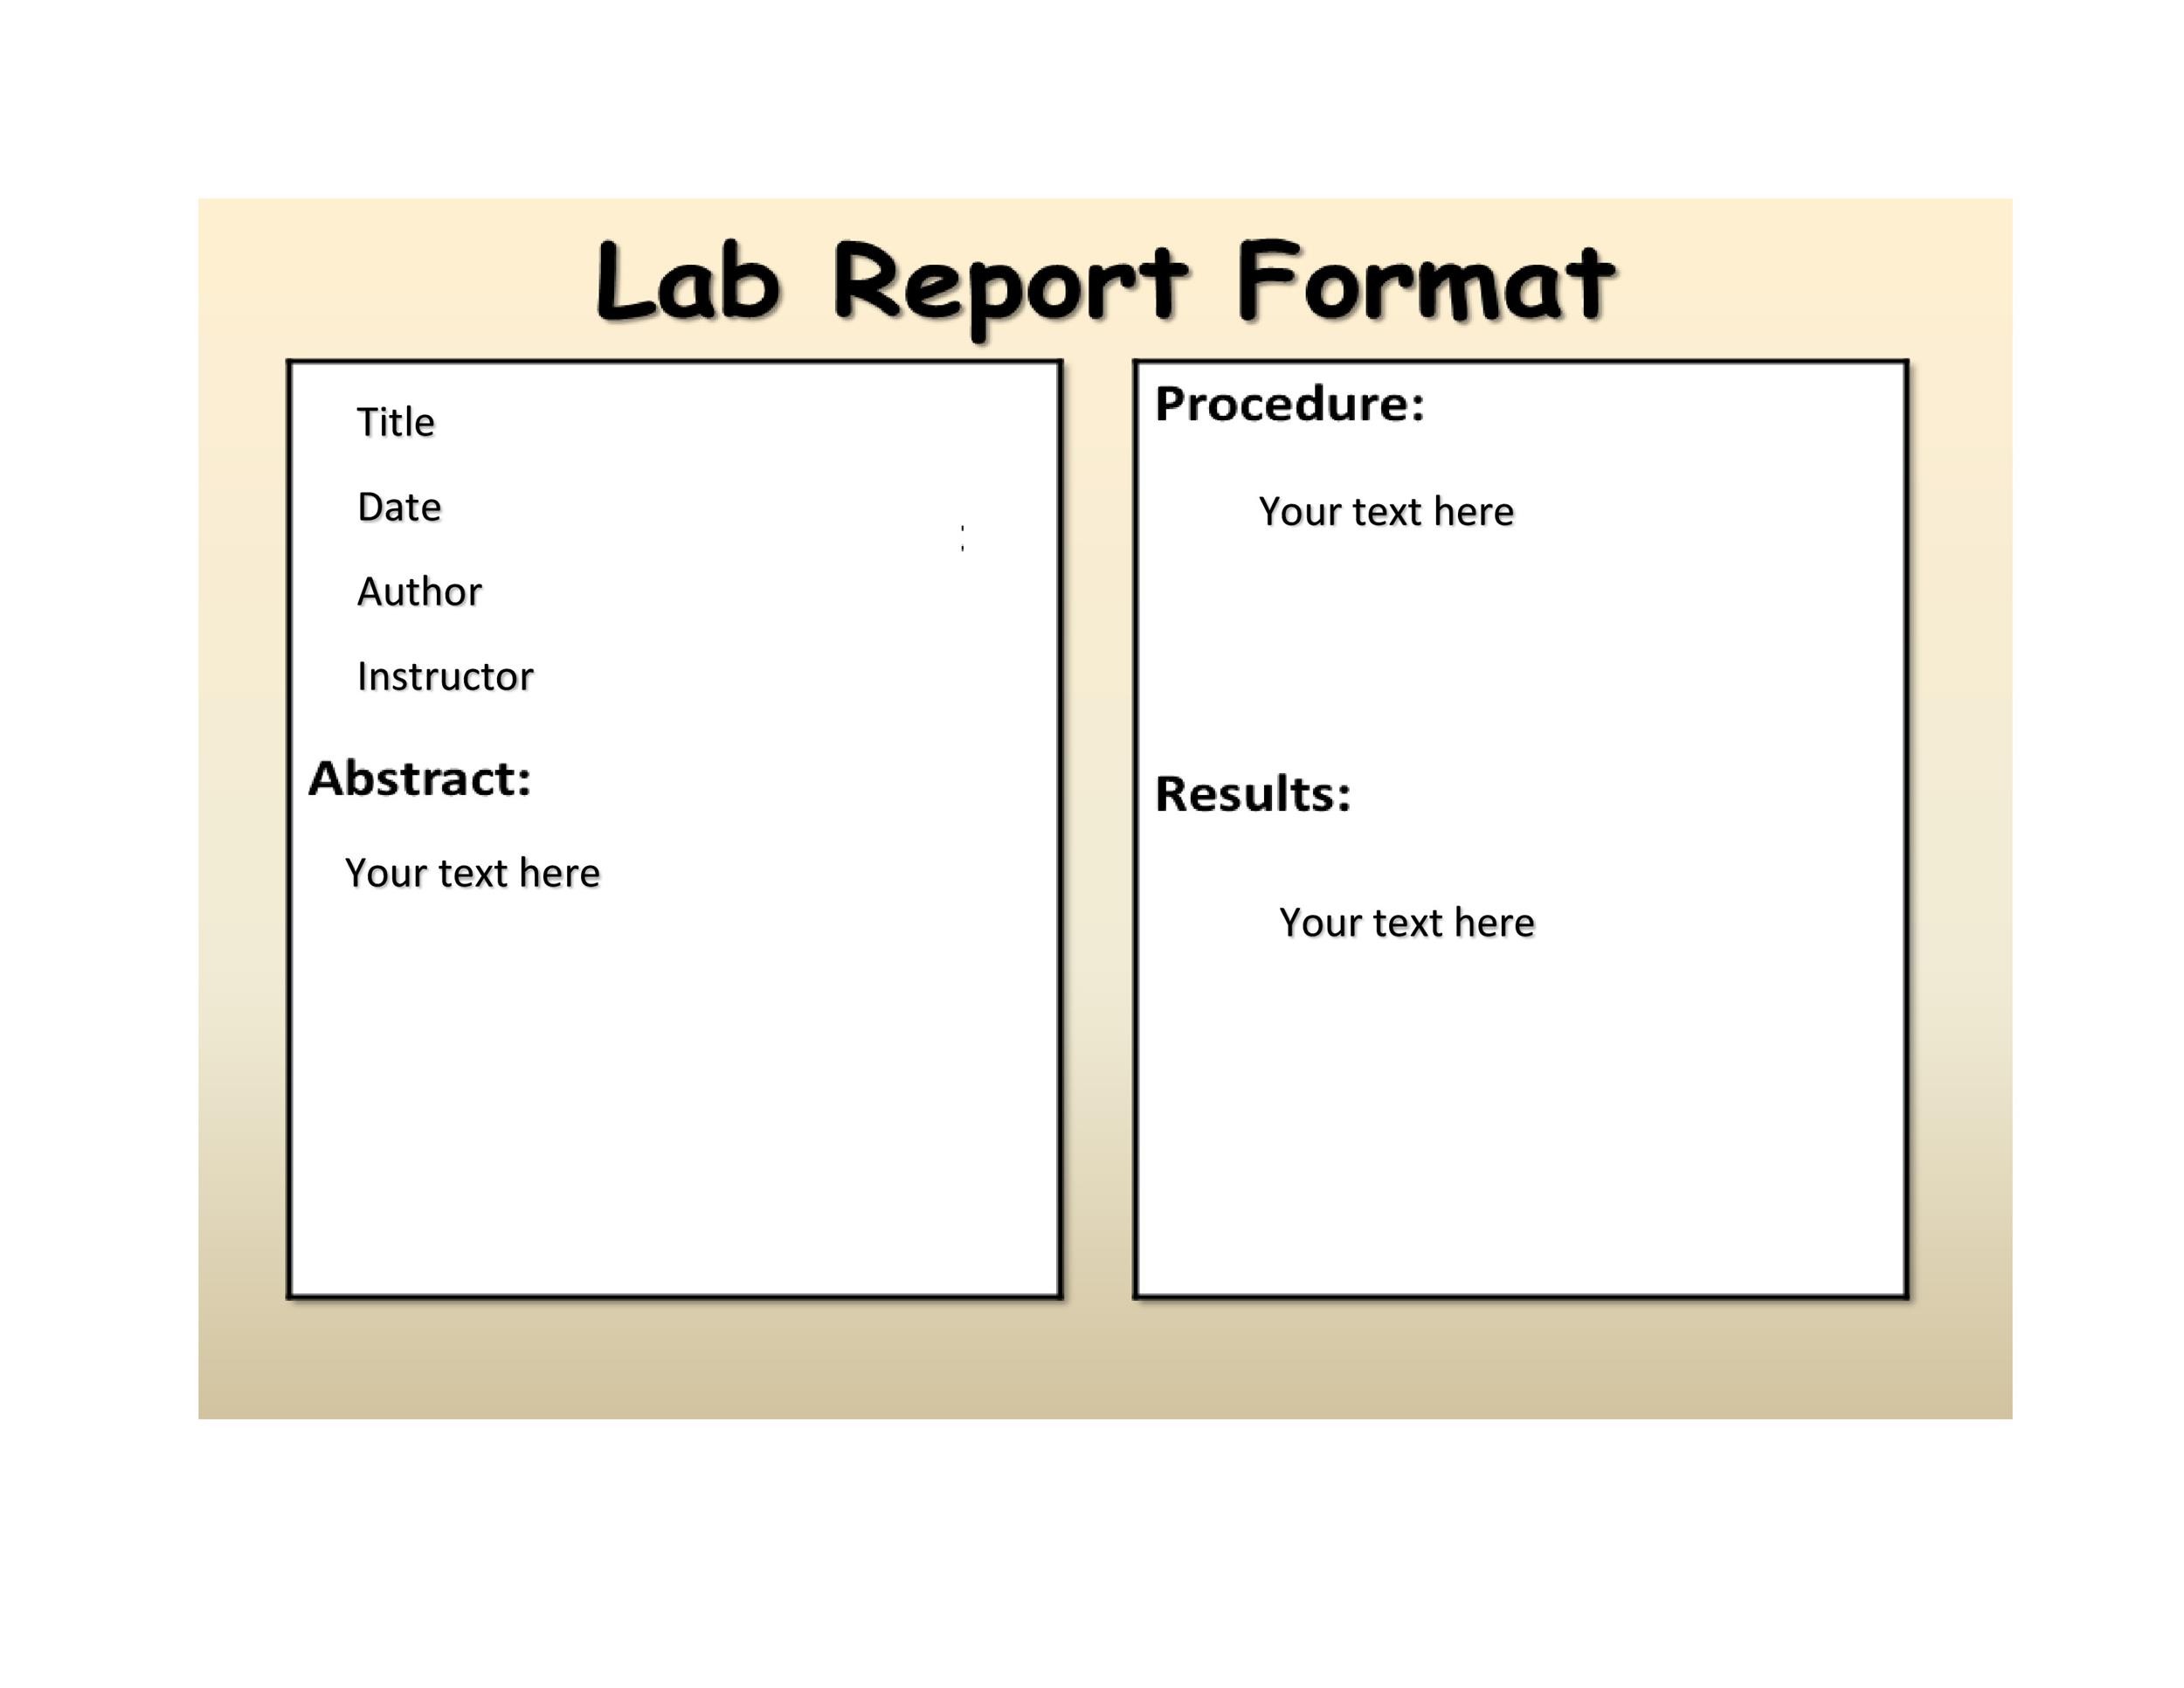 chemistry lab report guidelines